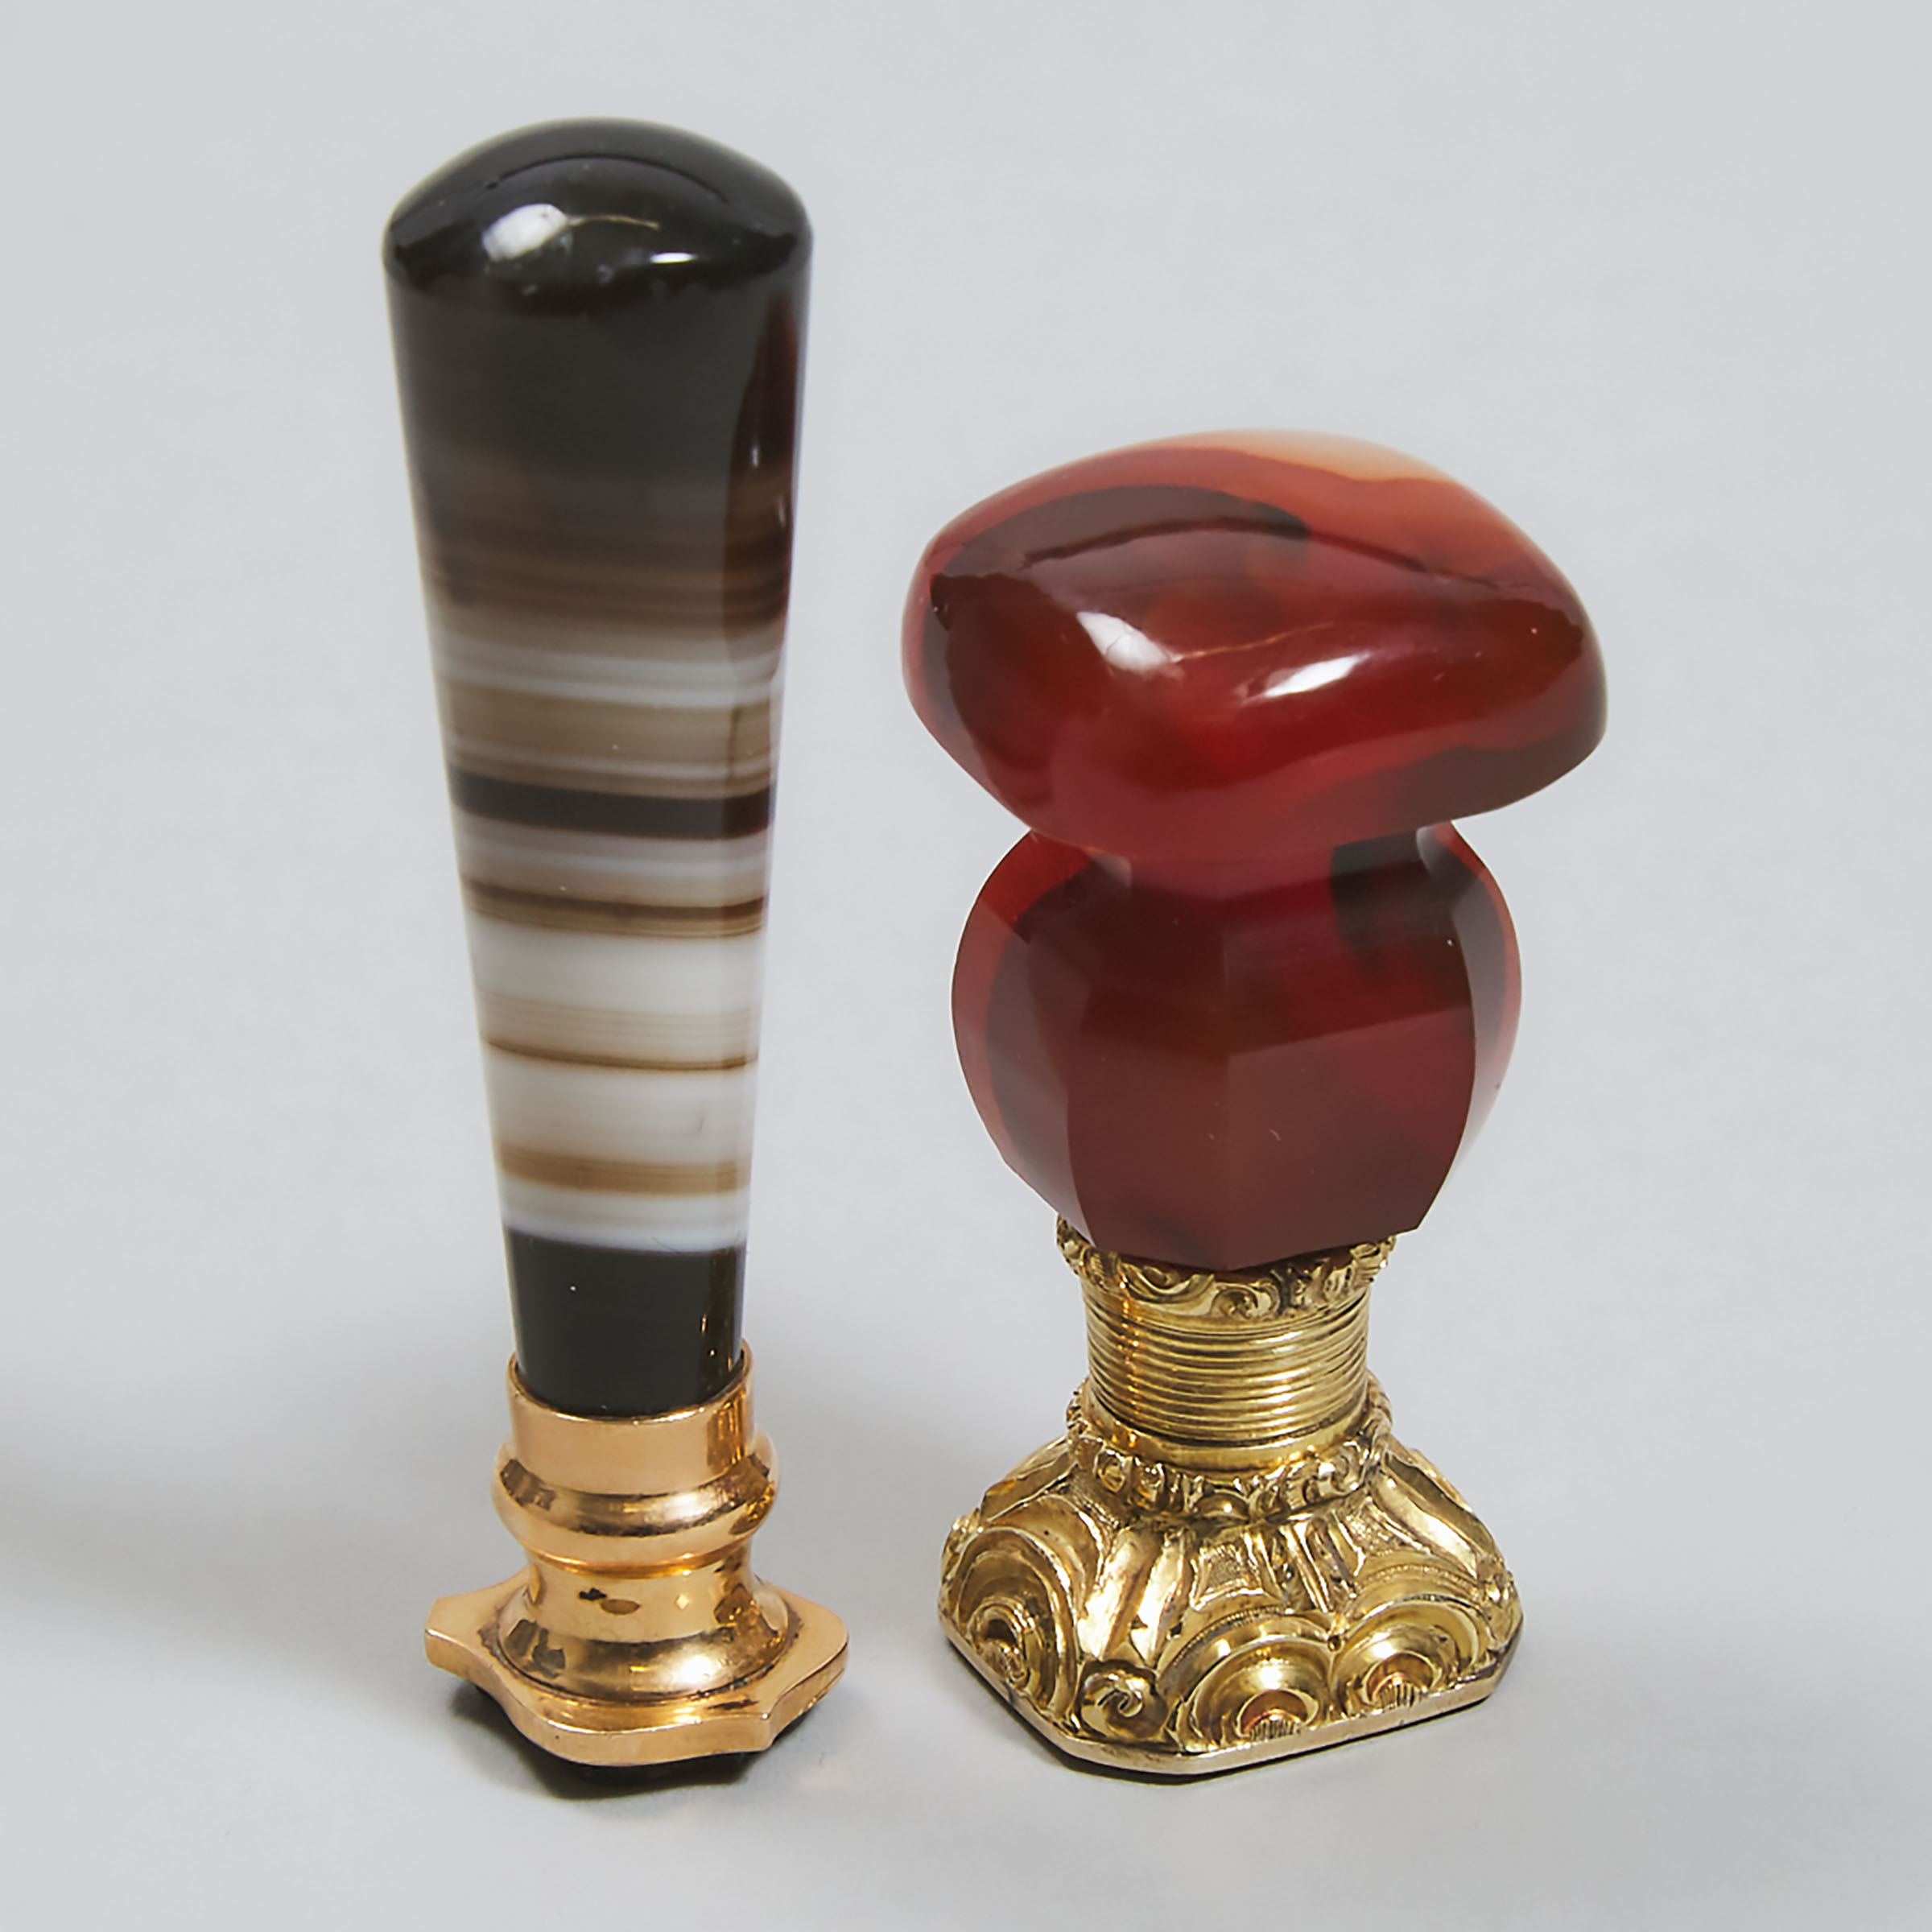 Two Gold Mounted Agate Desk Seals, 19th/early 20th century